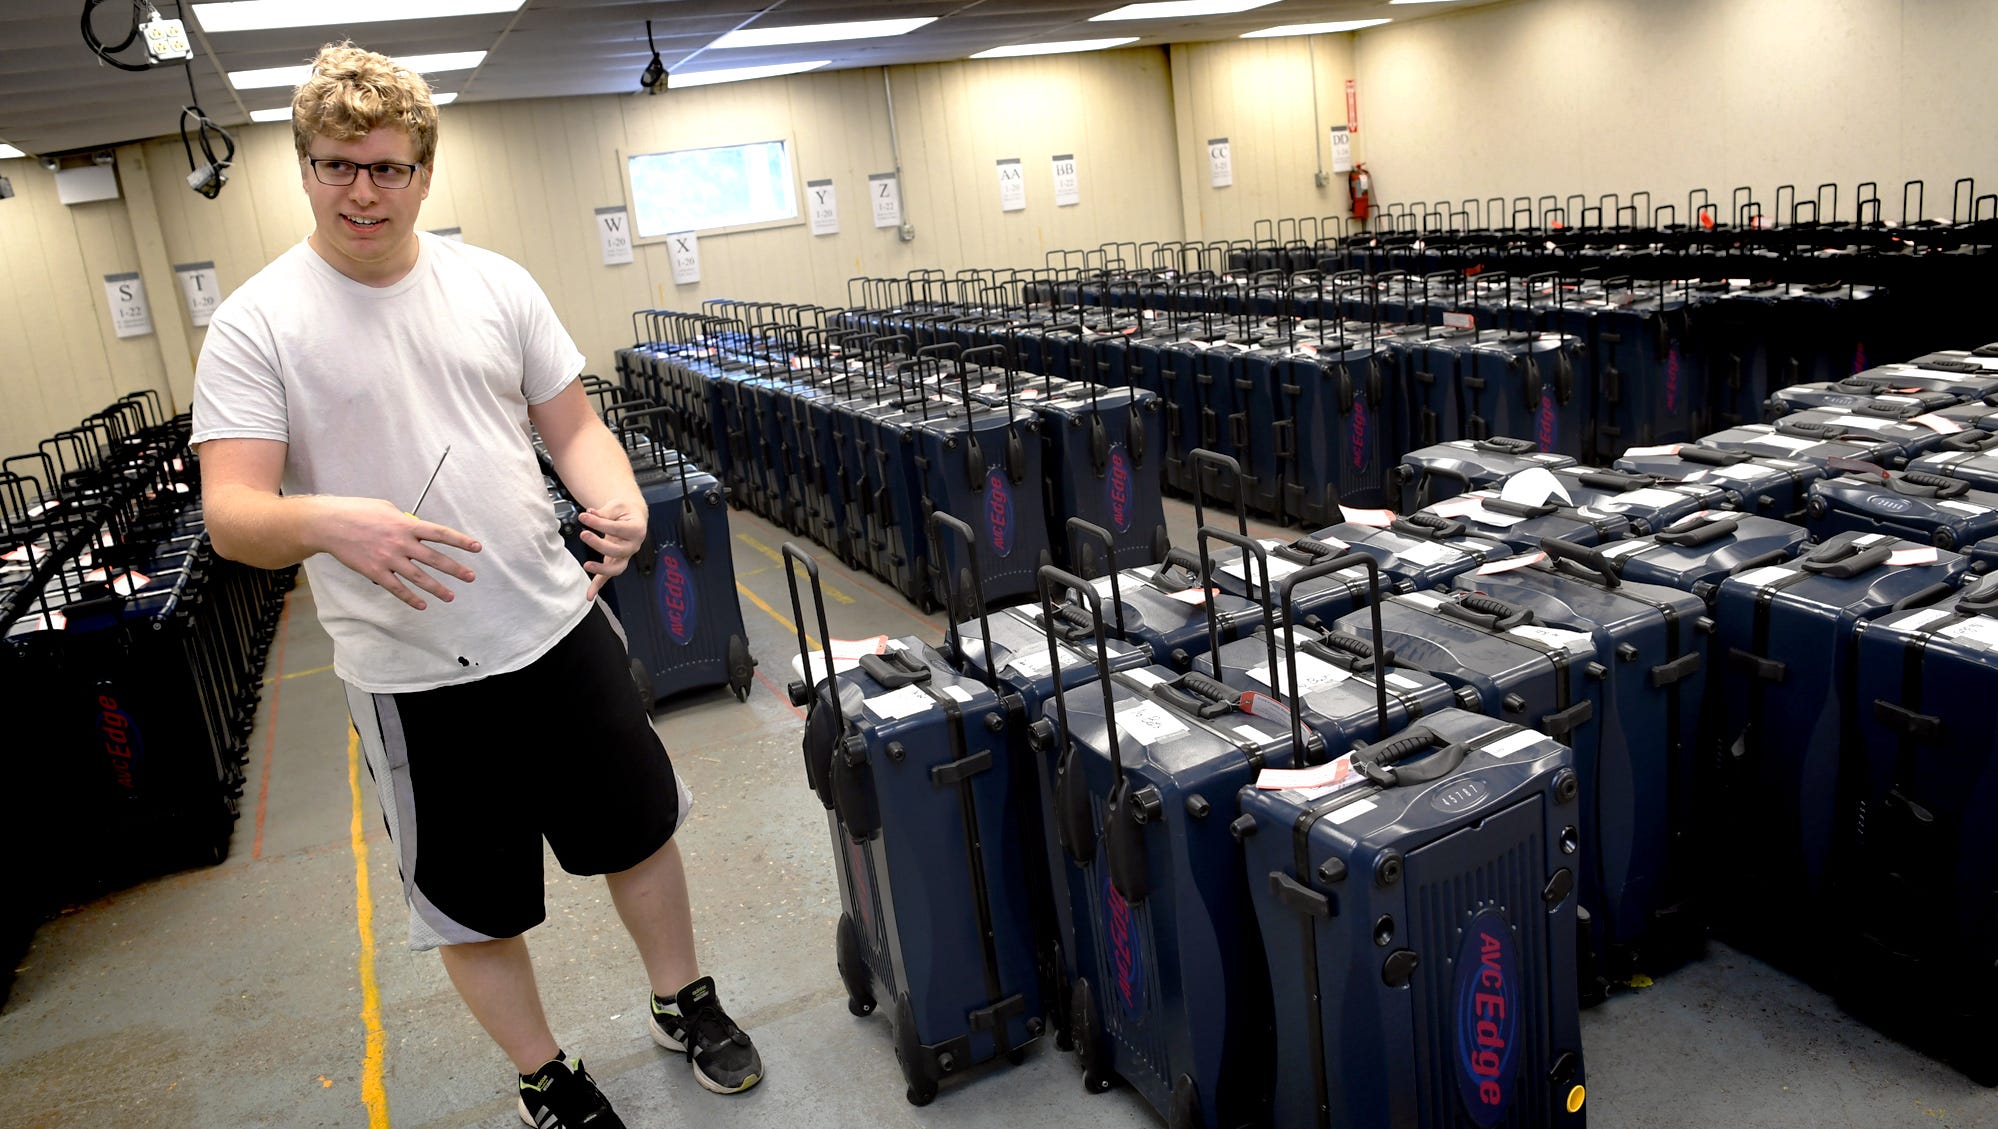 York County Voting Technology Coordinator Casey Brady talks about the 45 voting machines in disrepair in county elections at a storage warehouse in an undisclosed area Thursday, June 7, 2018. He repairs the machines and uses them for parts. He says the county has 624 working voting machines , background. He's been in the job for three months. "It's been a lot to pick up pretty quick," he said. In April, Gov. Tom Wolf directed all counties to replace machines, like those used in York County, with new voting machinesall offering paper trailsby 2020. Bill Kalina photo